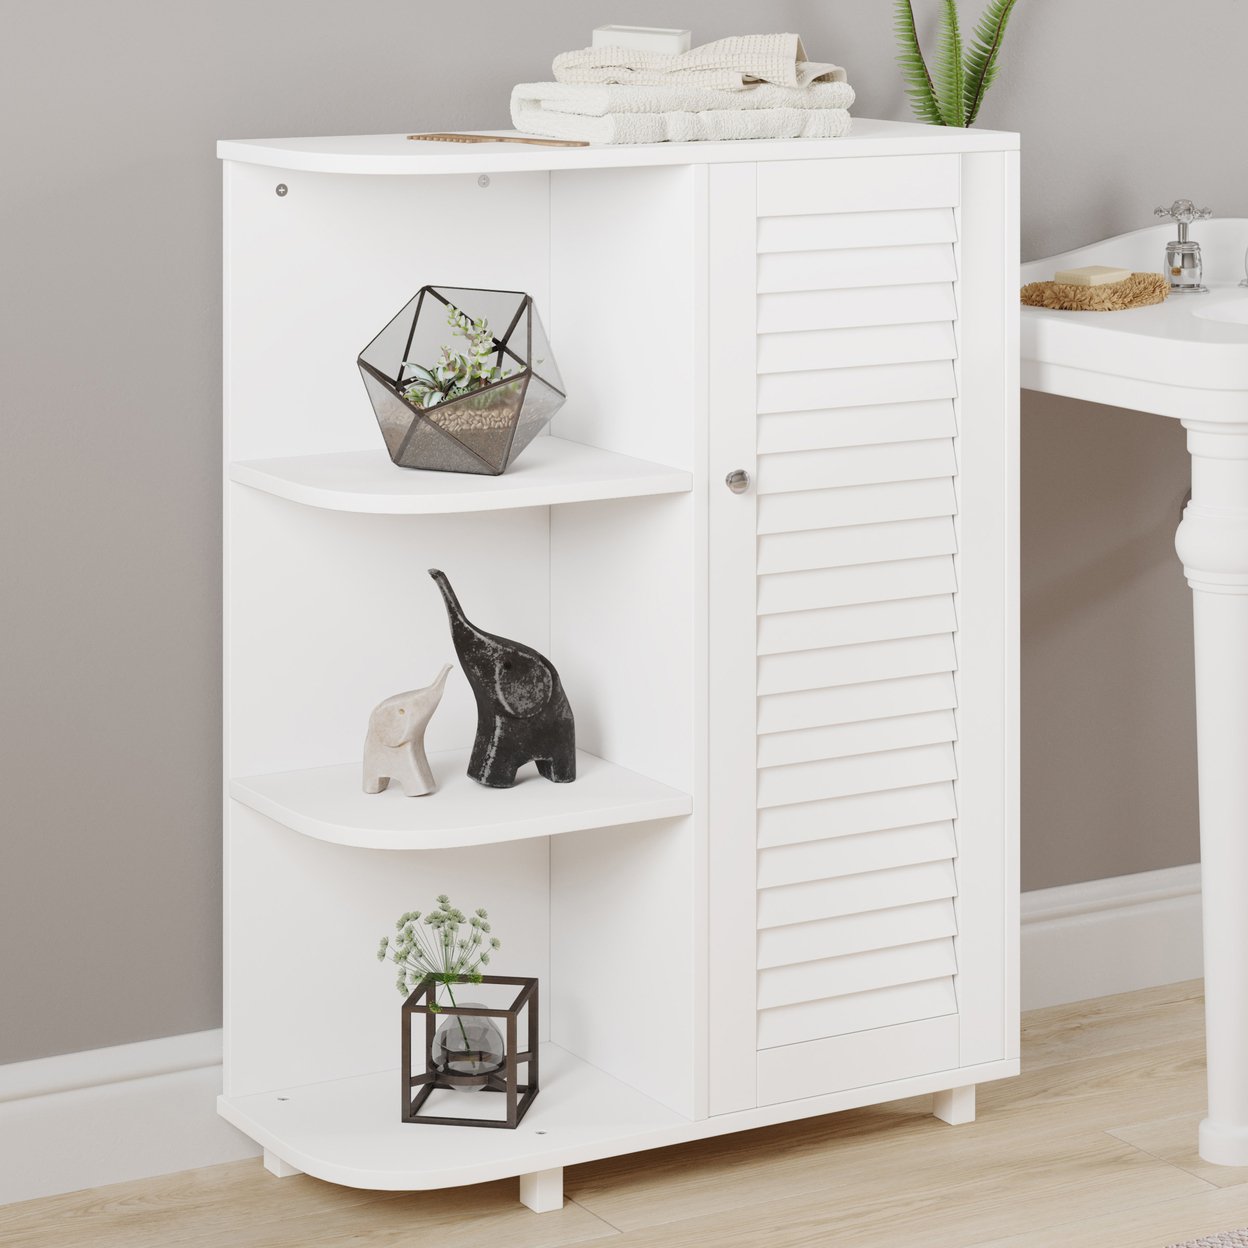 Floor Cabinet With Curved Shelves Kitchen Or Bathroom Storage Cabinet, White